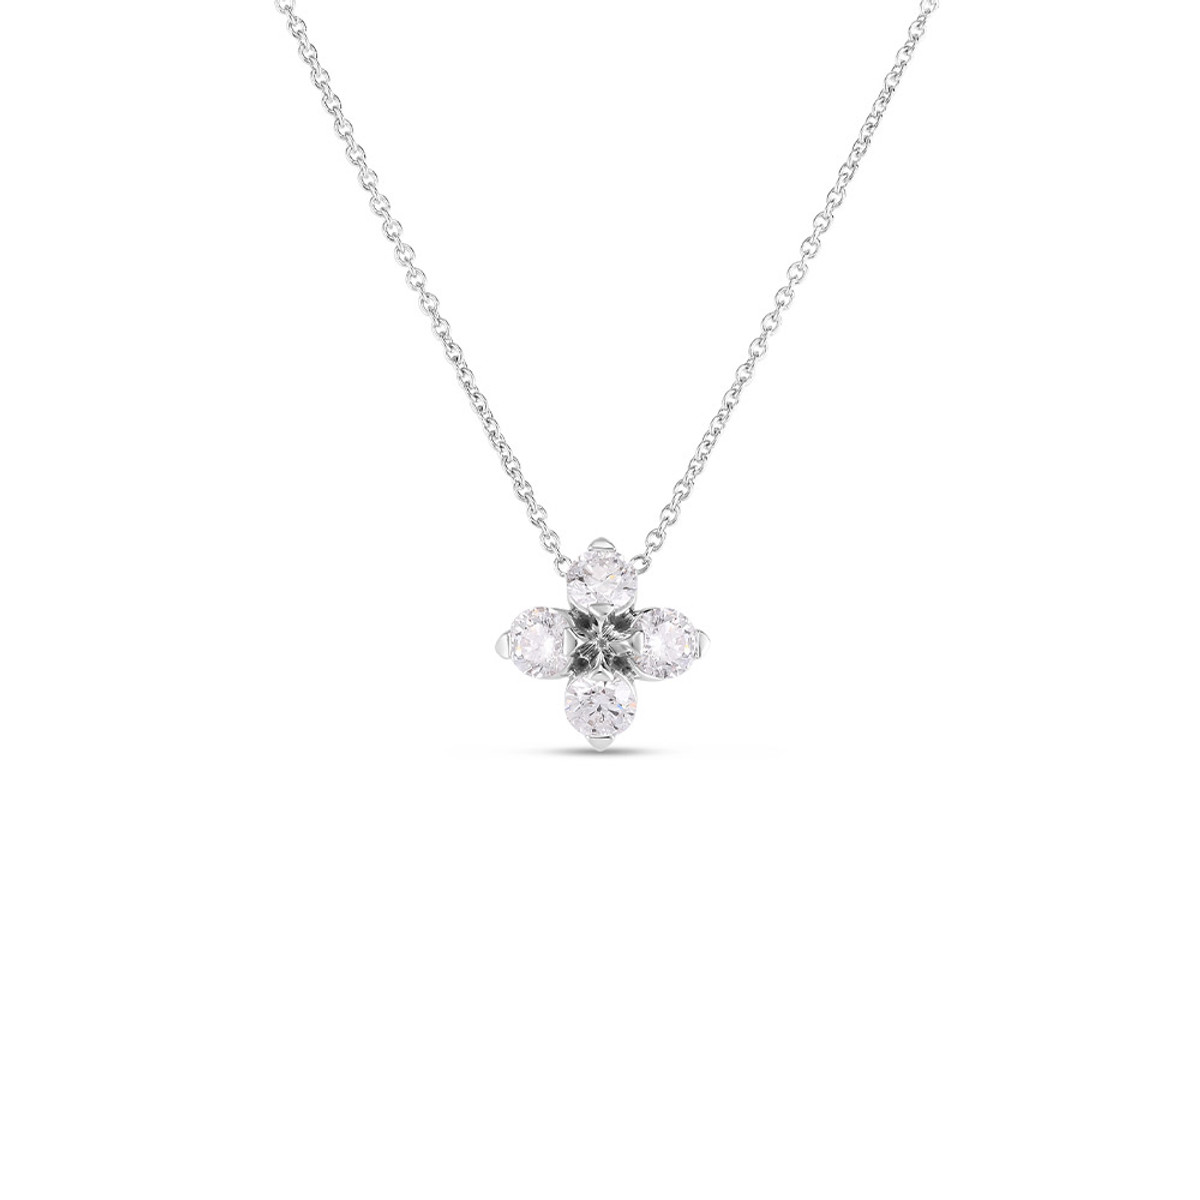 Roberto Coin 18K White Gold Love in Verona Diamond Flower Necklace-44403 Product Image